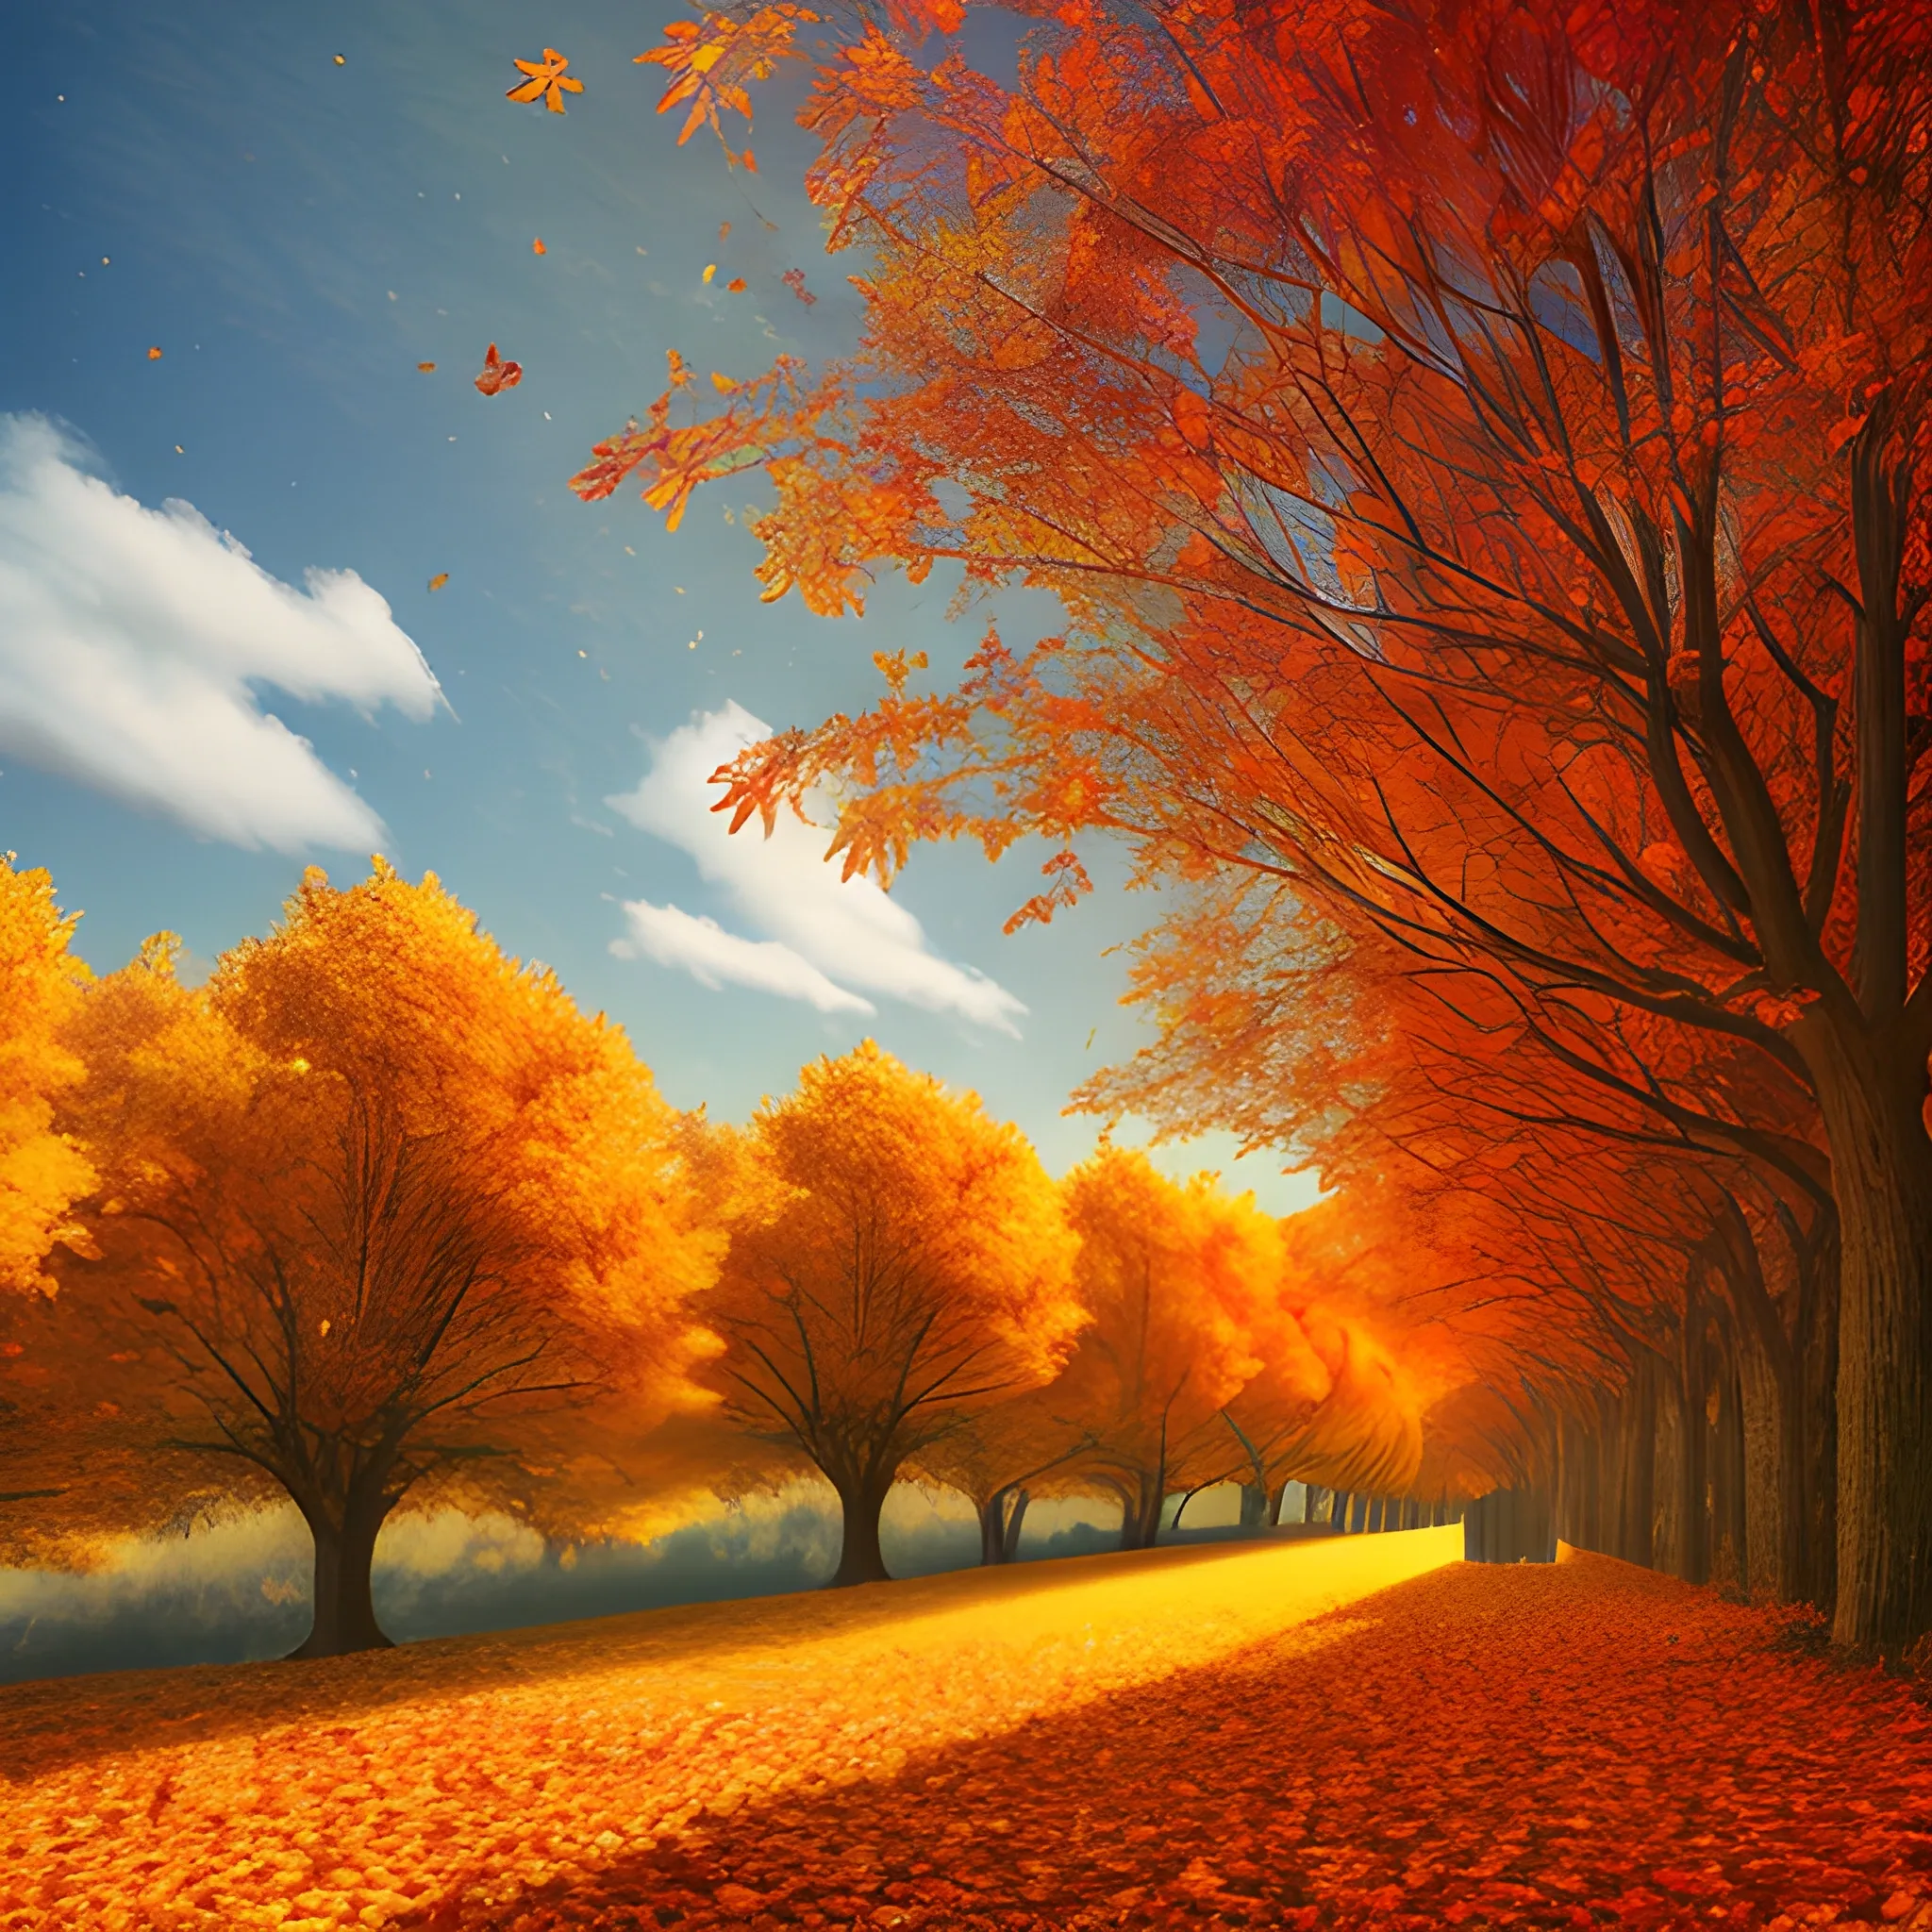 Super real autumn scenery, rows of trees